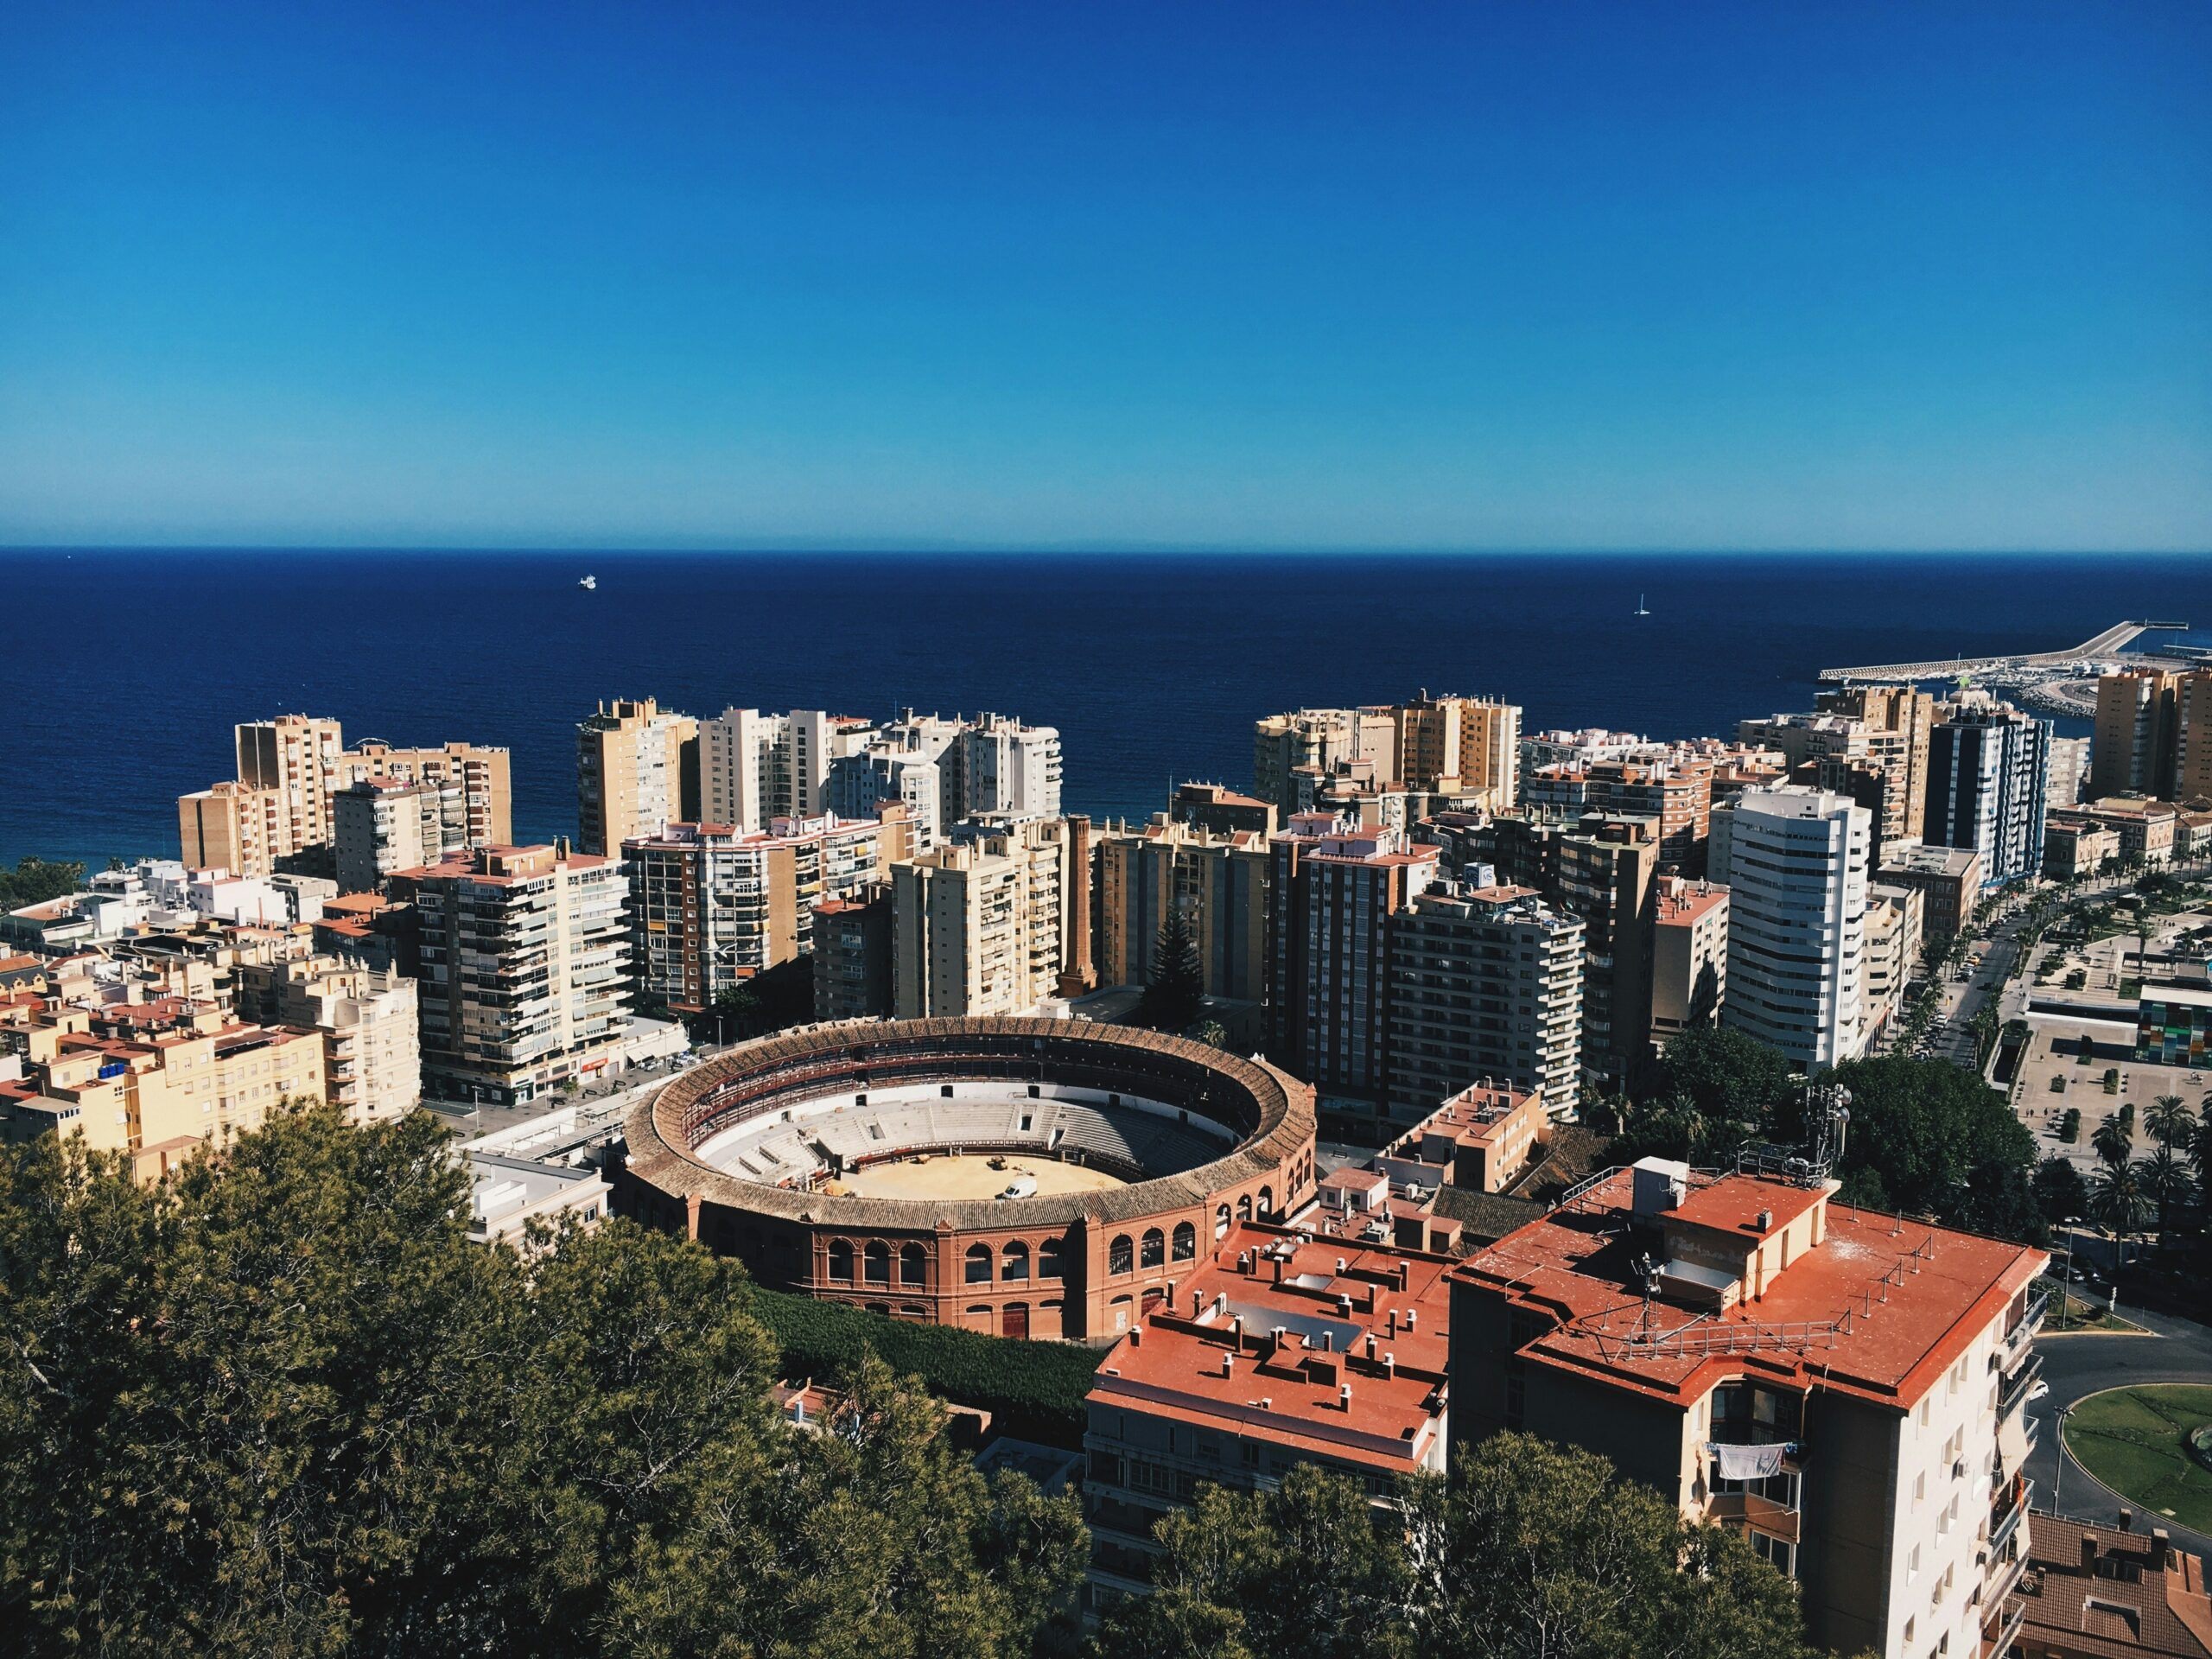 Learn more about structural issues that increase the need for a railway in Spain. 
pictured: Malaga cityscape